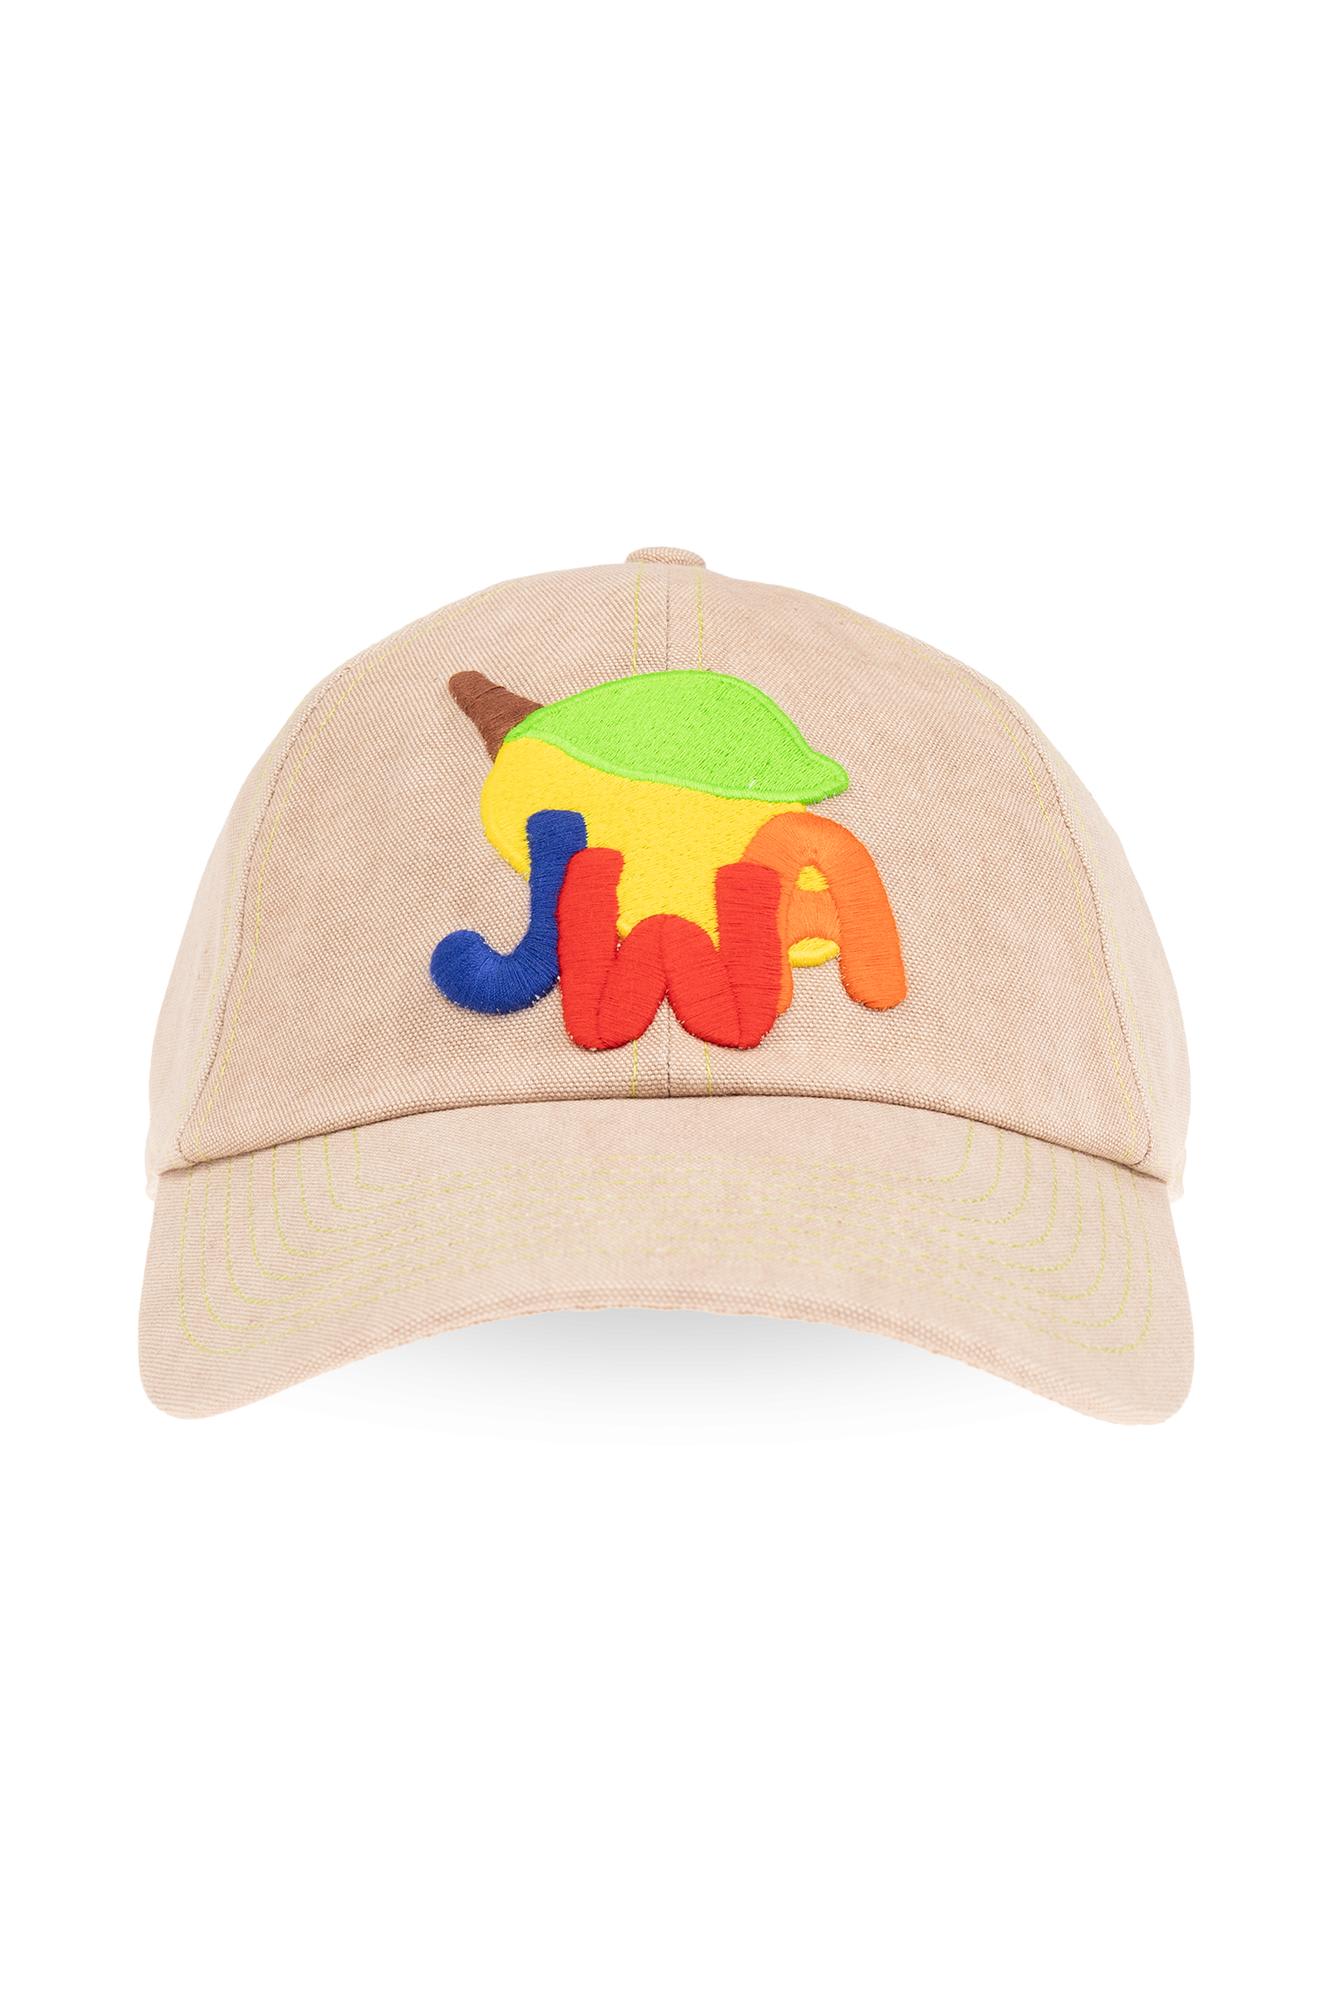 J.W. Anderson Jw Anderson Patched Baseball Cap